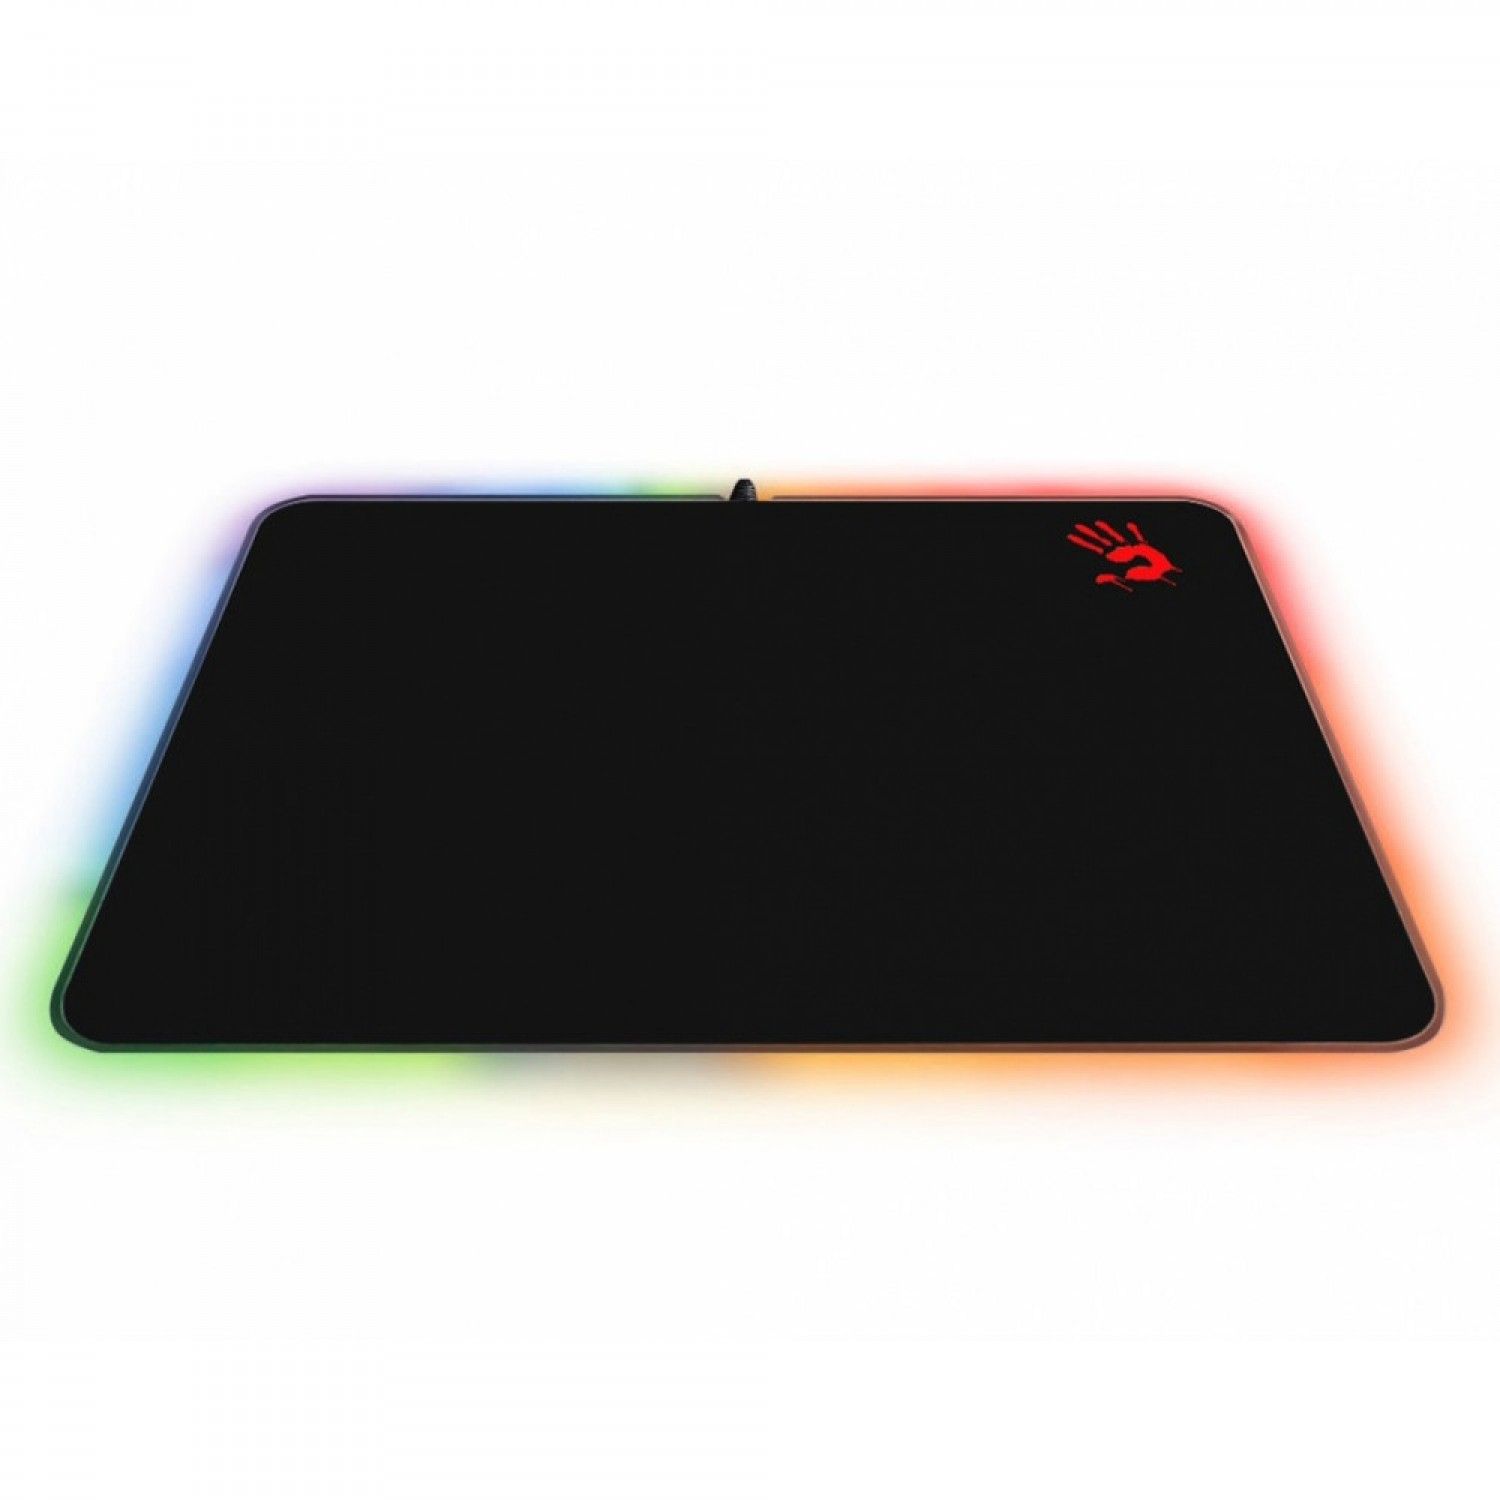 A4tech Bloody MP-50 RS Gaming Mouse pad-1